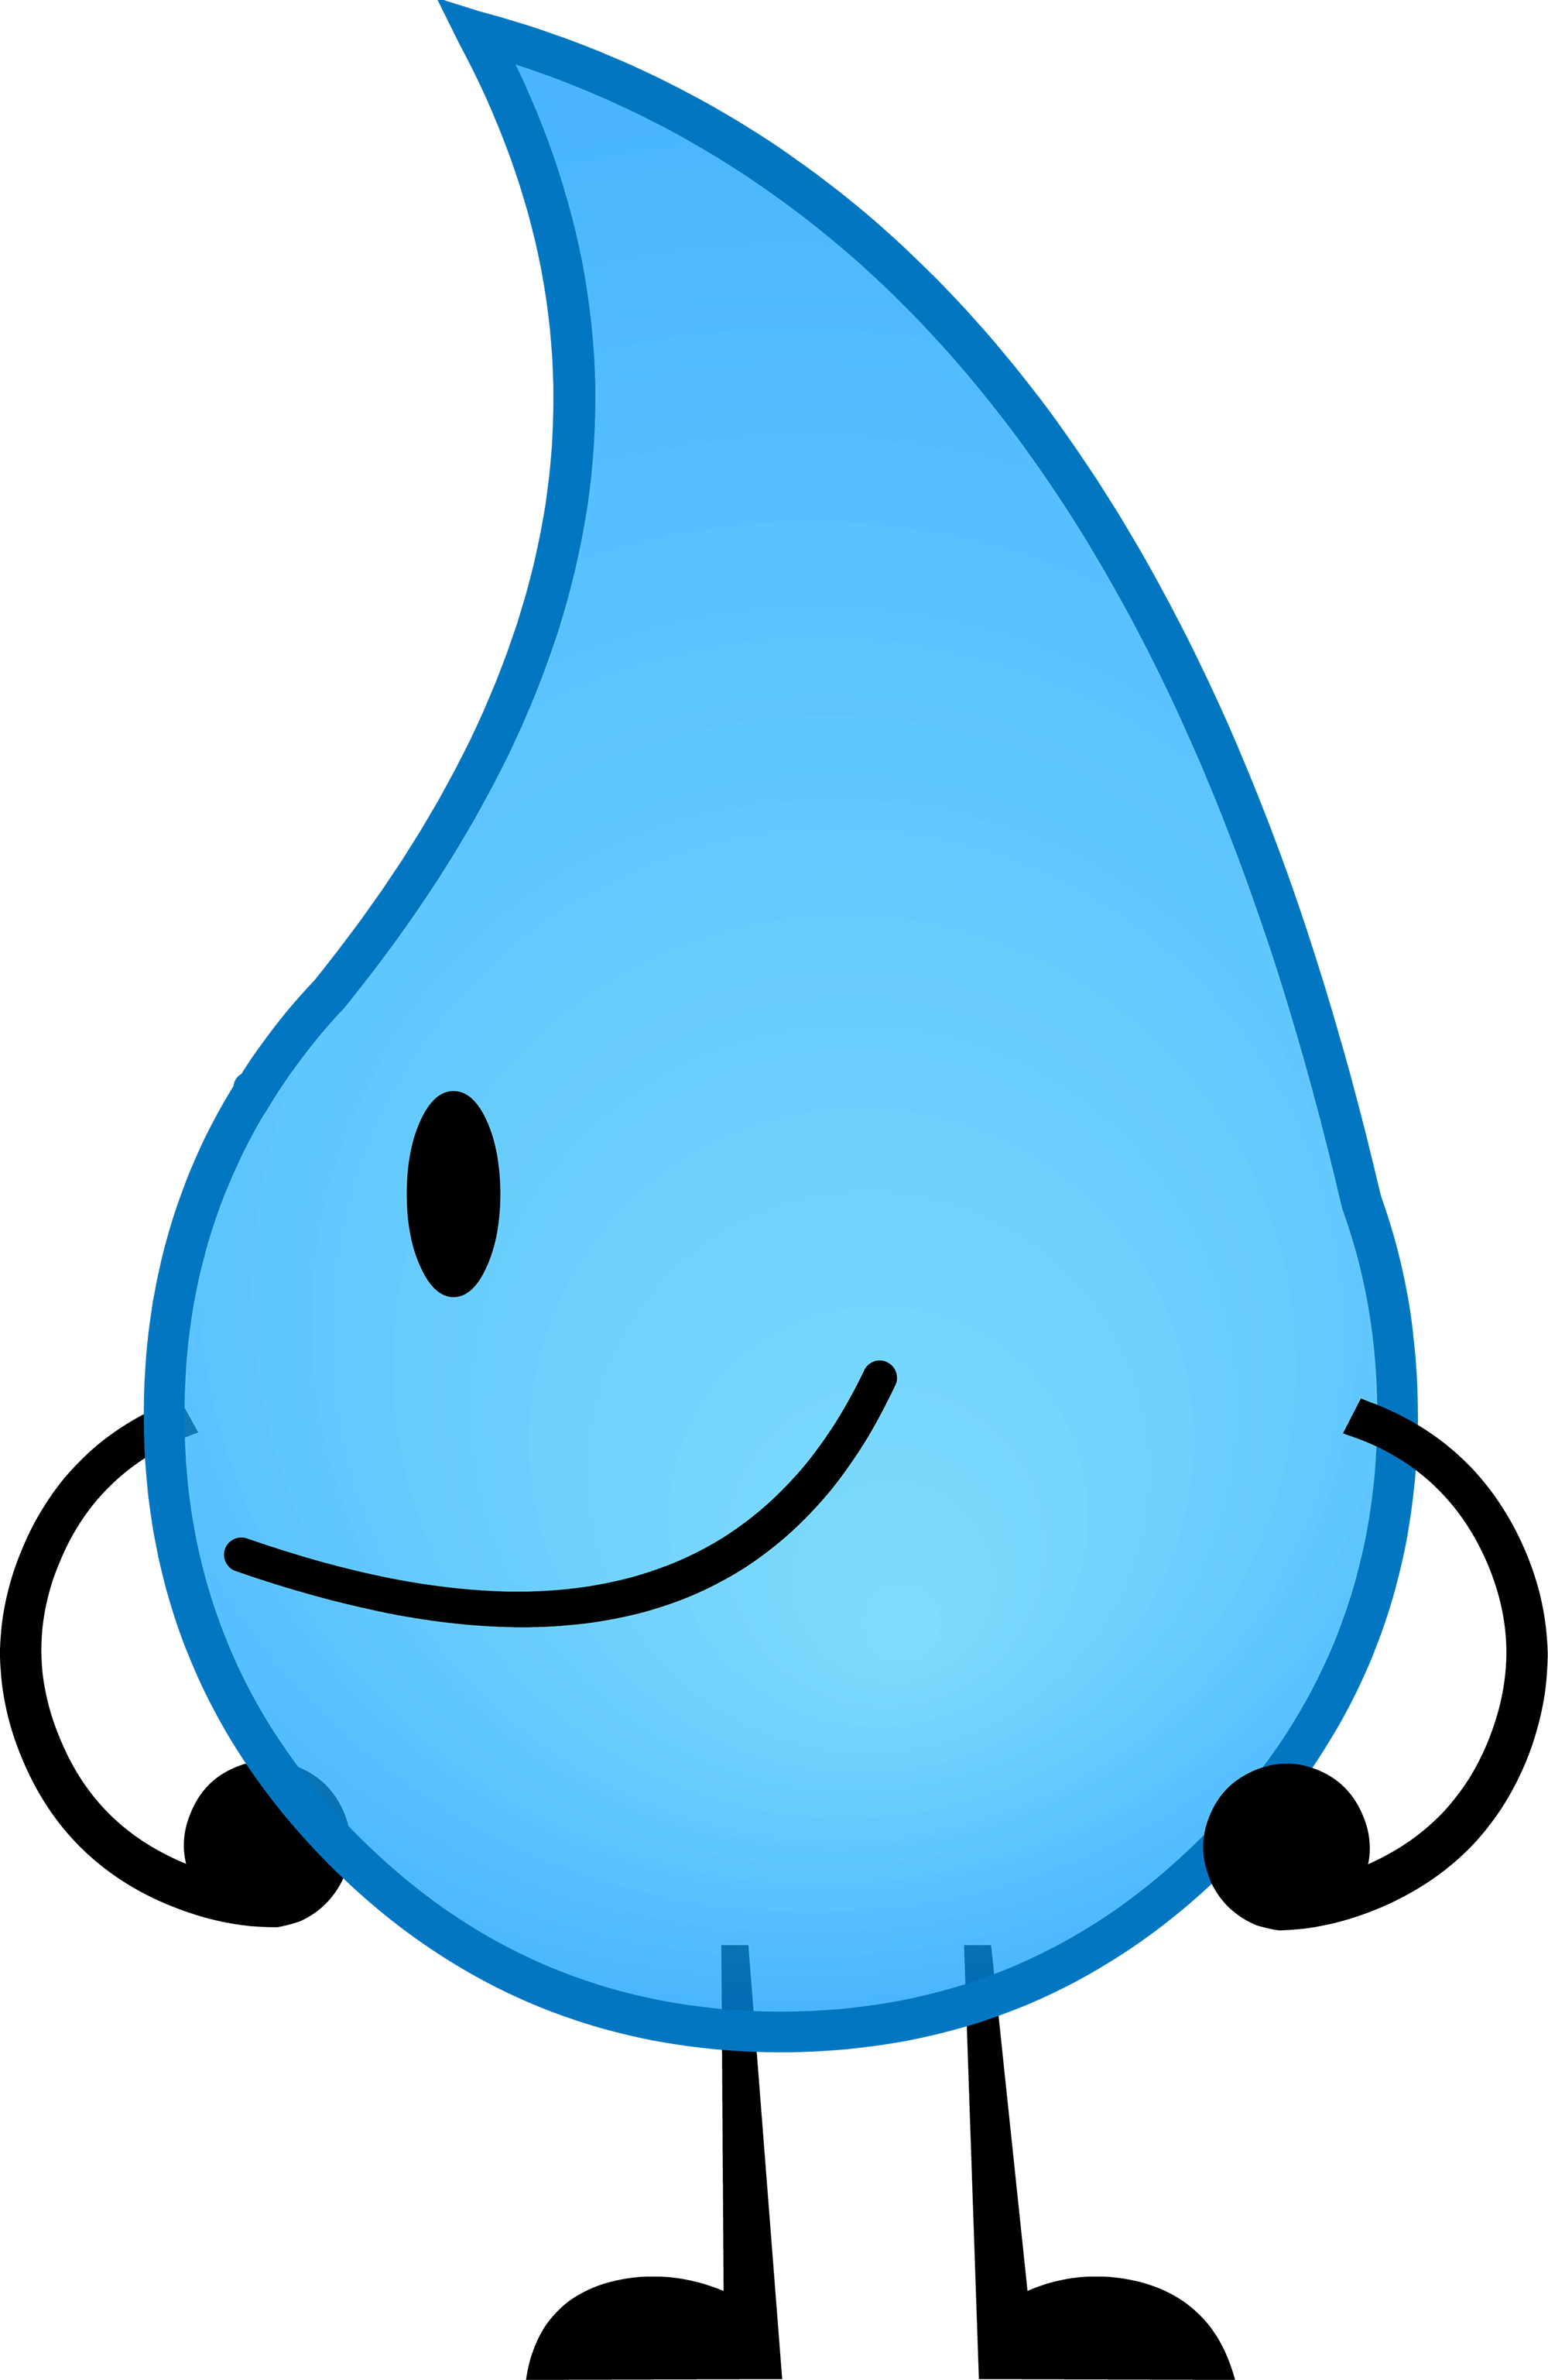 Bfdi Teardrop, Find more high quality free transparent png clipart images o...